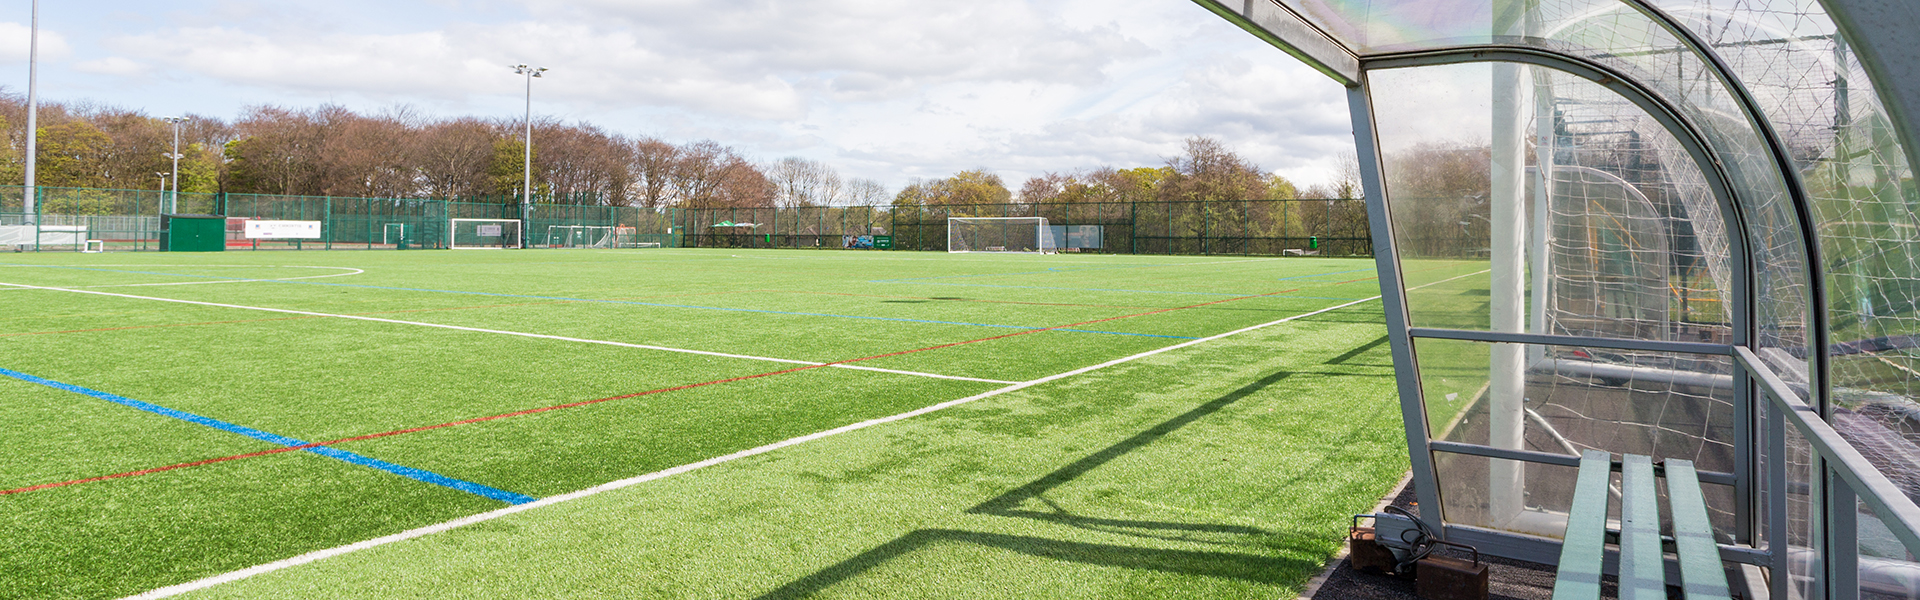 Weetwood artificial grass pitch